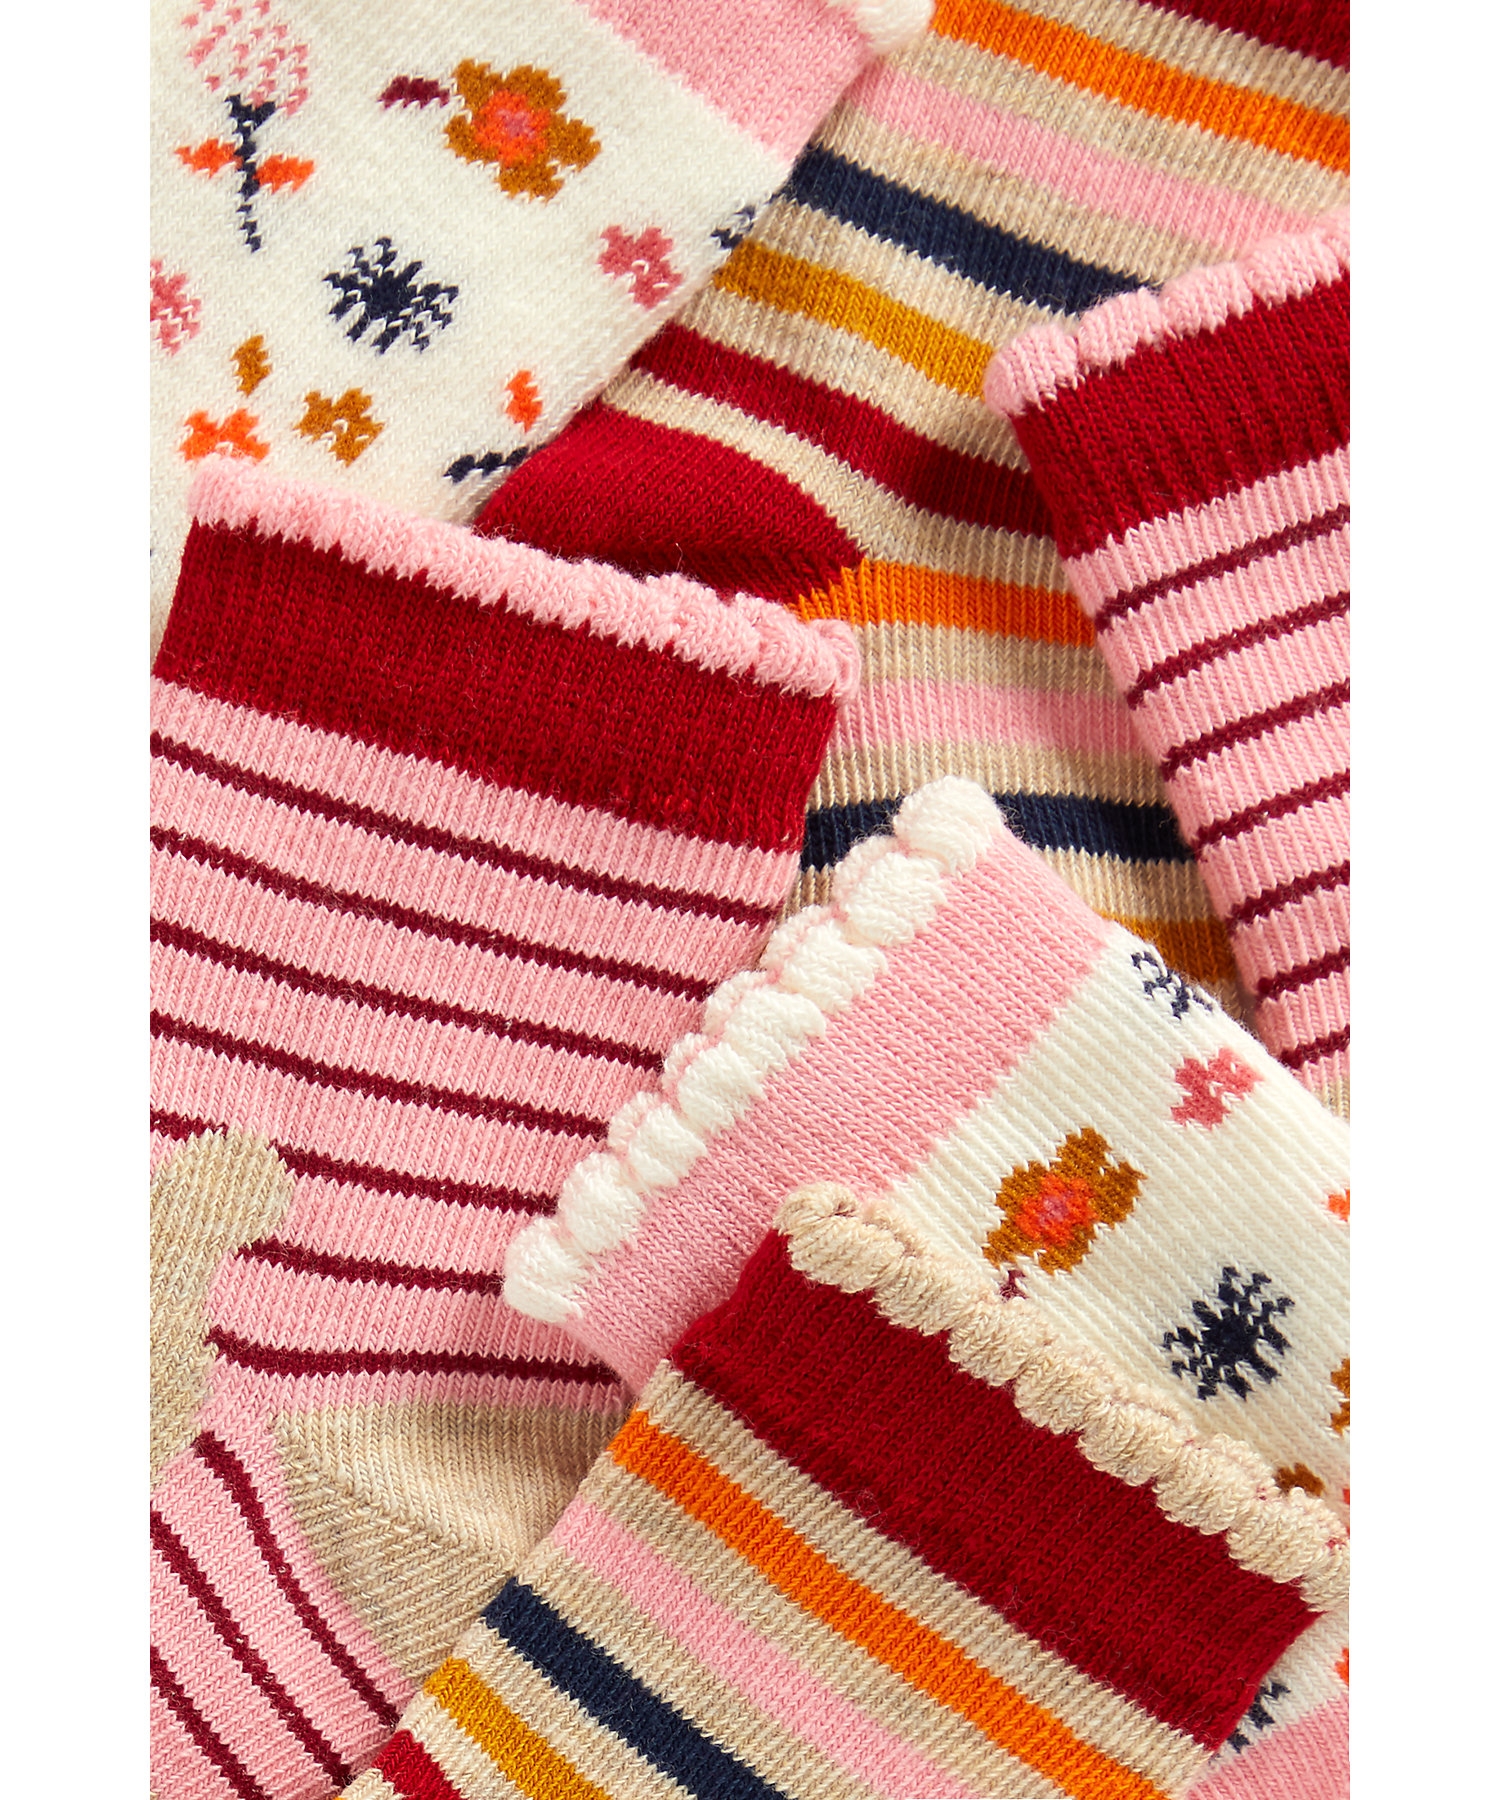 Mothercare | Girls Socks Striped And Floral Design - Pack Of 3 - Multicolor 2